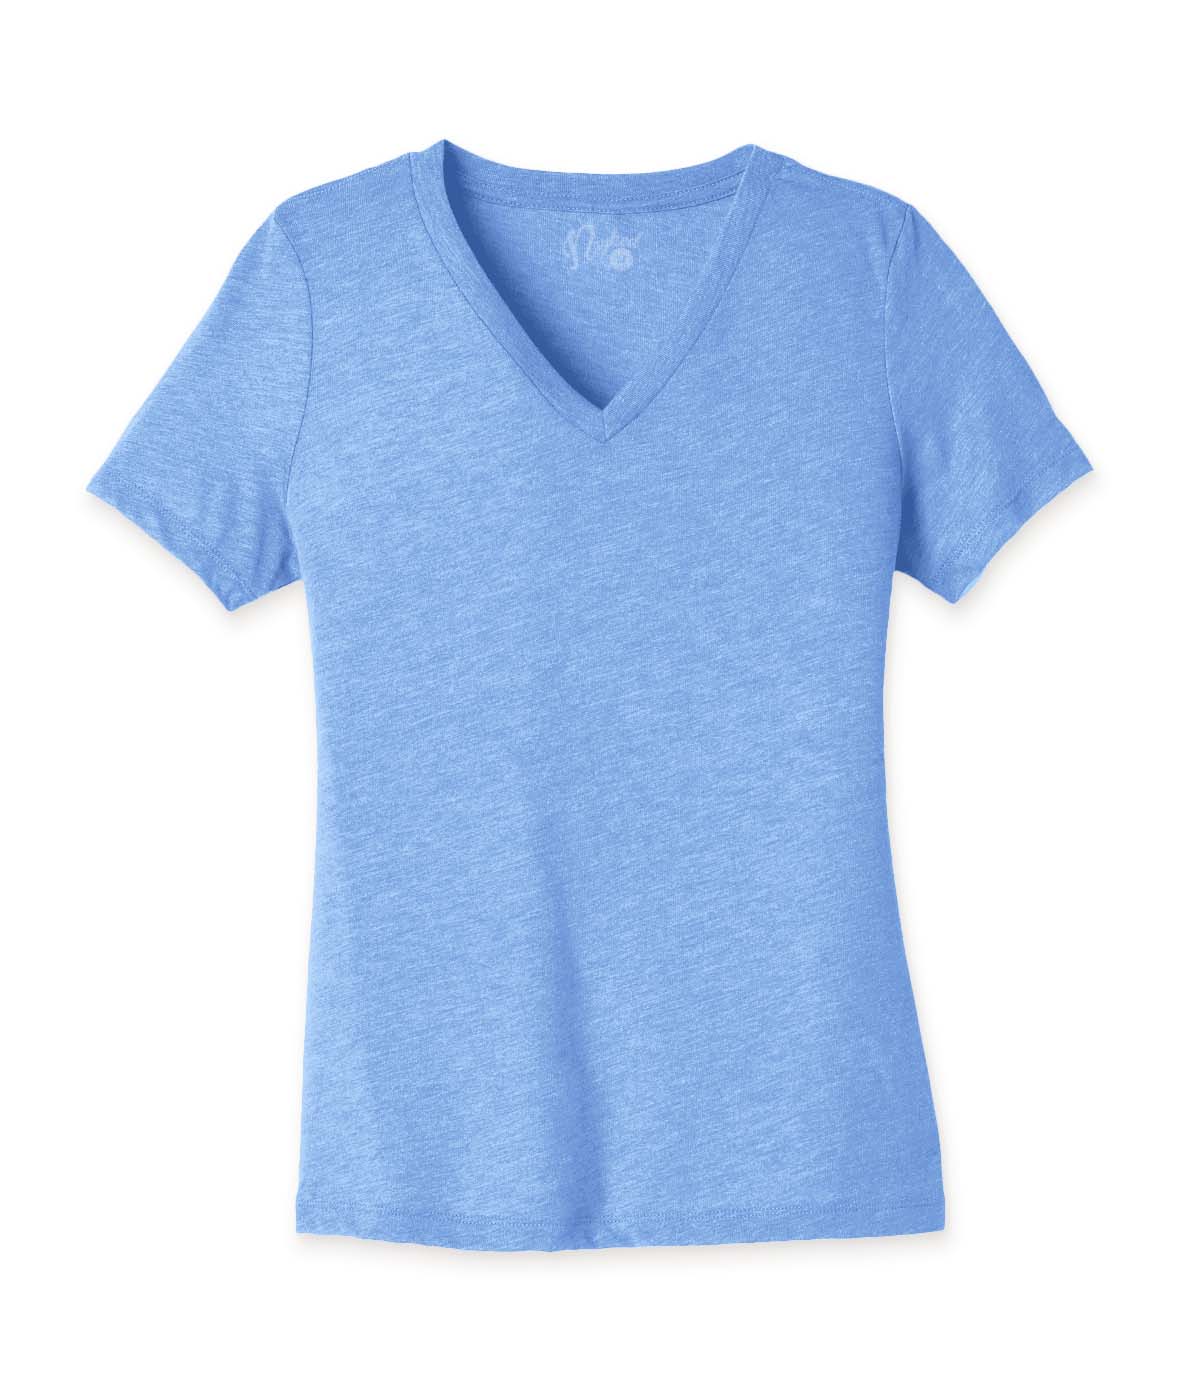 Women's Ridiculously Soft Relaxed Fit Lightweight V-Neck T-Shirt Worn by Model